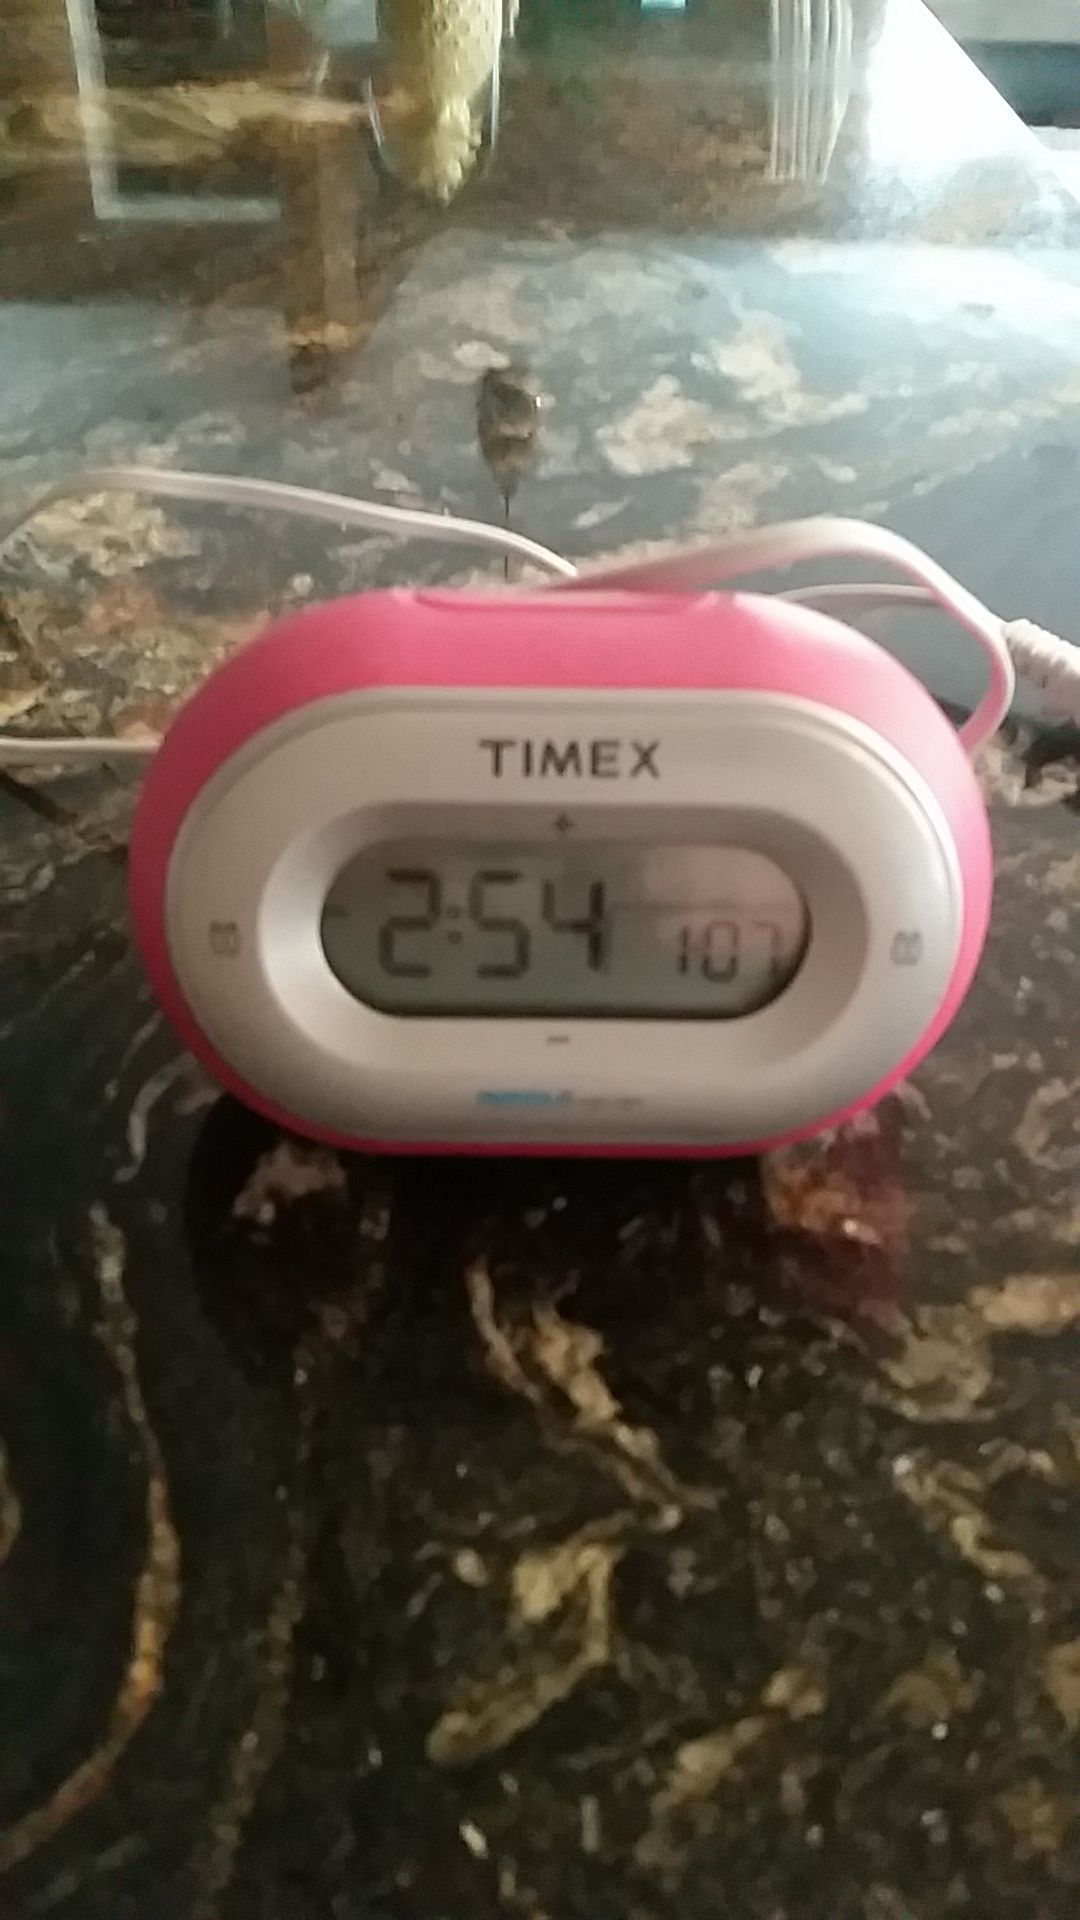 Timex digital clock with 2 alarms, pink